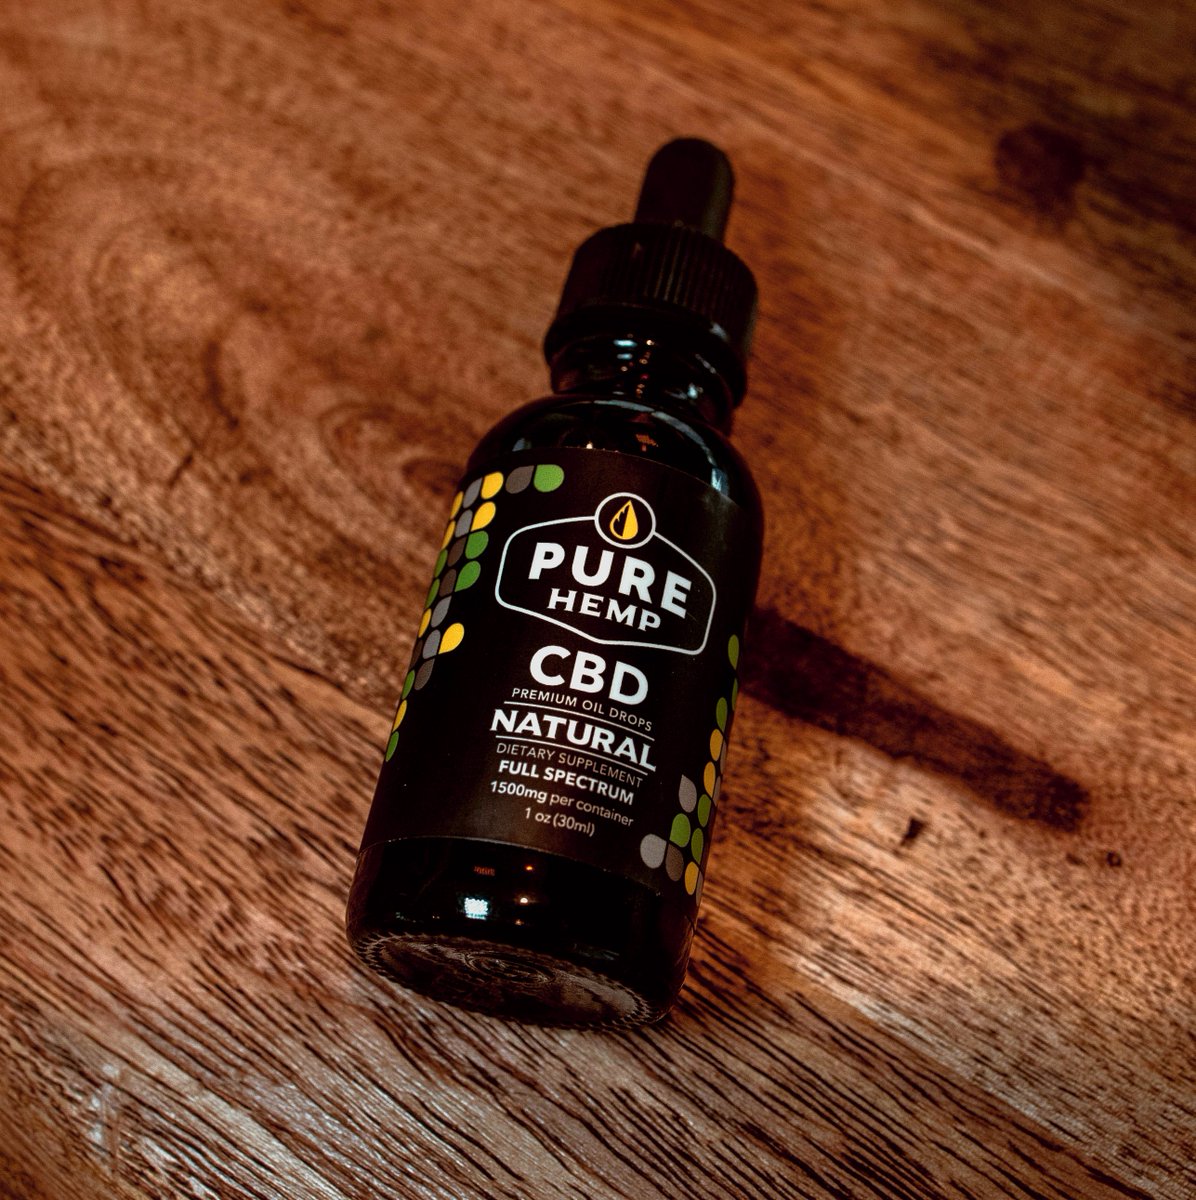 Check out the Pure Hemp Shop to start your week off on the right foot. l8r.it/78OX #PureHempShop #PureHemp #d9 #cbd #d8 #wellness #edibles #photooftheday #enjoylife #purebliss #relax